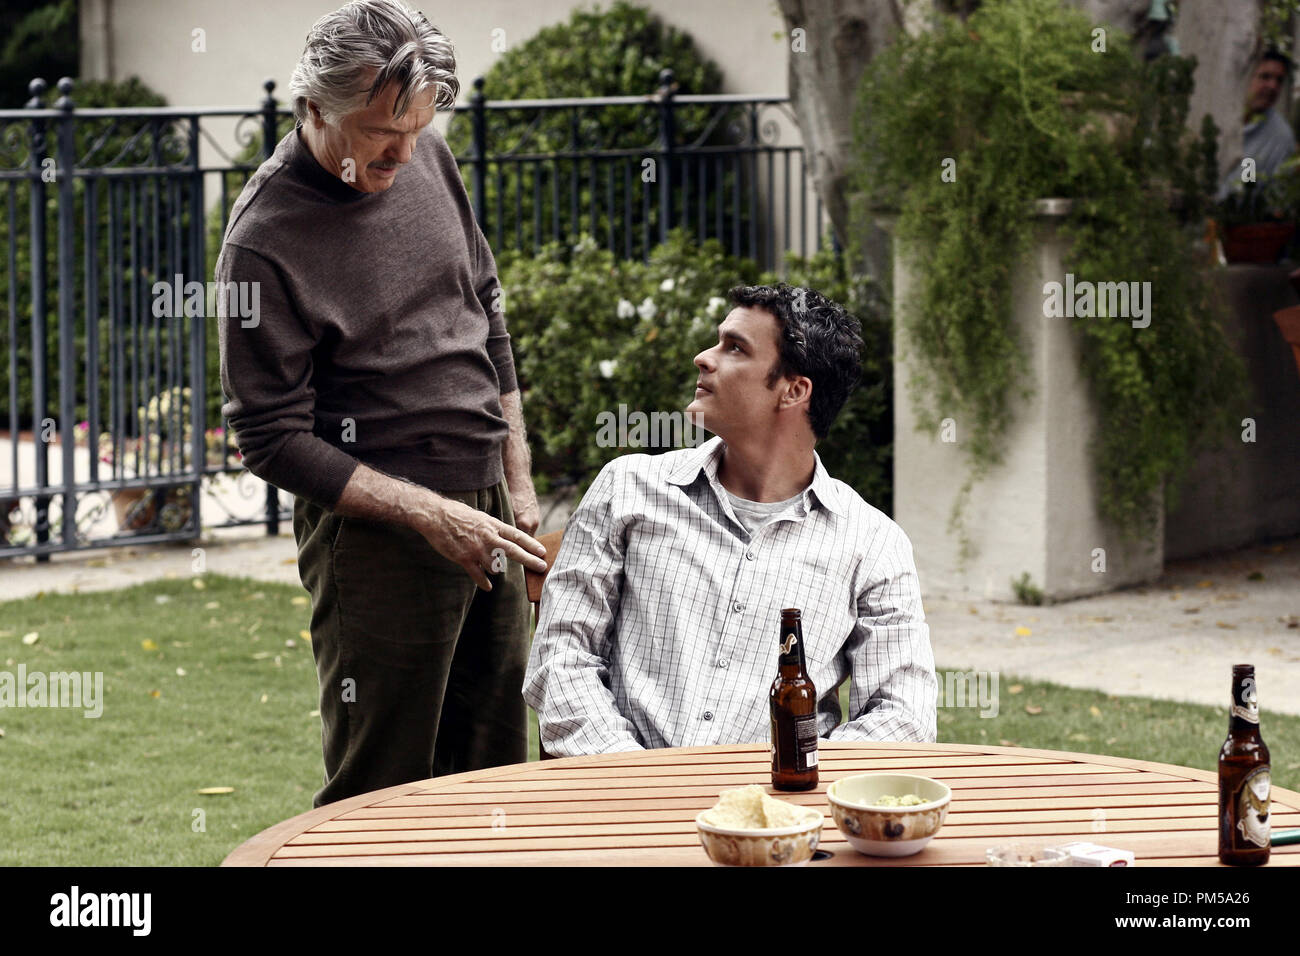 Studio Publicity Still from 'Brothers & Sisters' Tom Skerritt, Balthazar Getty 2006 Photo credit: Scott Garfield   File Reference # 307371543THA  For Editorial Use Only -  All Rights Reserved Stock Photo